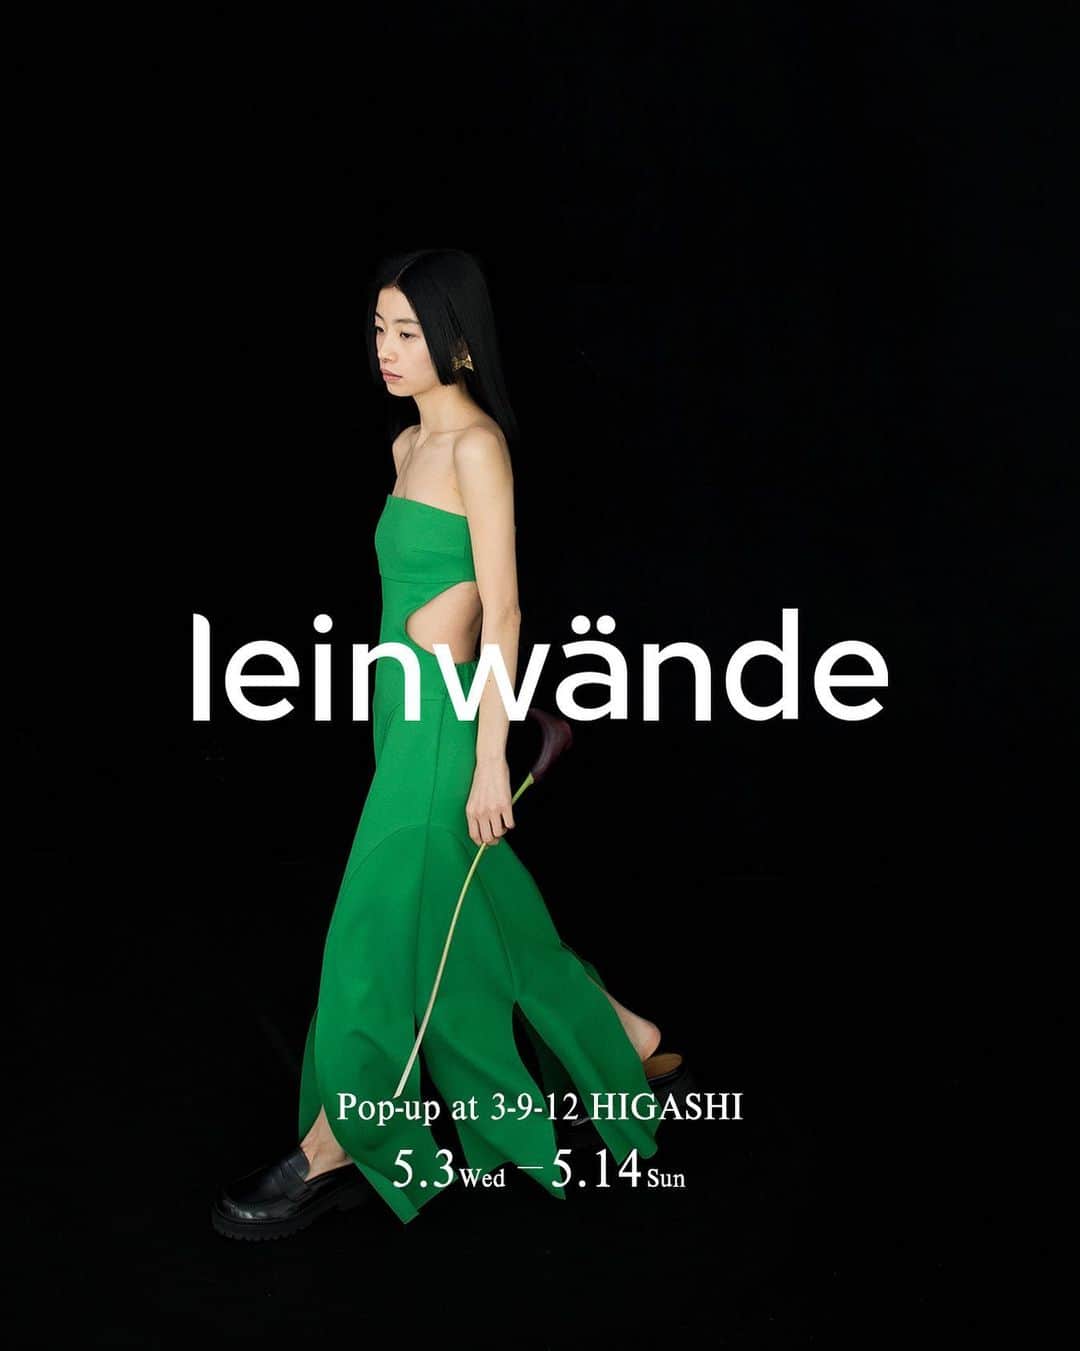 leinwande_officialさんのインスタグラム写真 - (leinwande_officialInstagram)「ㅤㅤㅤㅤㅤㅤㅤㅤㅤㅤㅤㅤㅤ Pop-up at 3-9-12 HIGASHI from 5/3~5/14. ㅤㅤㅤㅤㅤㅤㅤㅤㅤㅤㅤㅤㅤ We will having a pop-up store at 3-9-12HIGASHI from 3rd to 14th May. This time, we will also simultaneously hold an advance order taking event for special-order shoes by "REGAL", which has evolved along with the history and commitment to craftsmanship that has remained unchanged for over 60 years. You will be able to see our new collection. We are looking forward to you visiting. ㅤㅤㅤㅤㅤㅤㅤㅤㅤㅤㅤㅤㅤ 5/3(水)-5/14(日)まで、3-9-12HIGASHIにてPop-up storeを開催いたします。 また今回、60年以上変わらない、ものづくりへのこだわりと歴史とともに進化を重ねてきた"REGAL"の別注シューズの先行受注会も同時開催いたします。 leinwändeの最新コレクションを実際にお手に取ってご覧いただく、特別な機会となります。 皆さまのご来店を心よりお待ちいたしております。 ㅤㅤㅤㅤㅤㅤㅤㅤㅤㅤㅤㅤㅤ #leinwände #leinwande」4月29日 20時17分 - leinwande_official